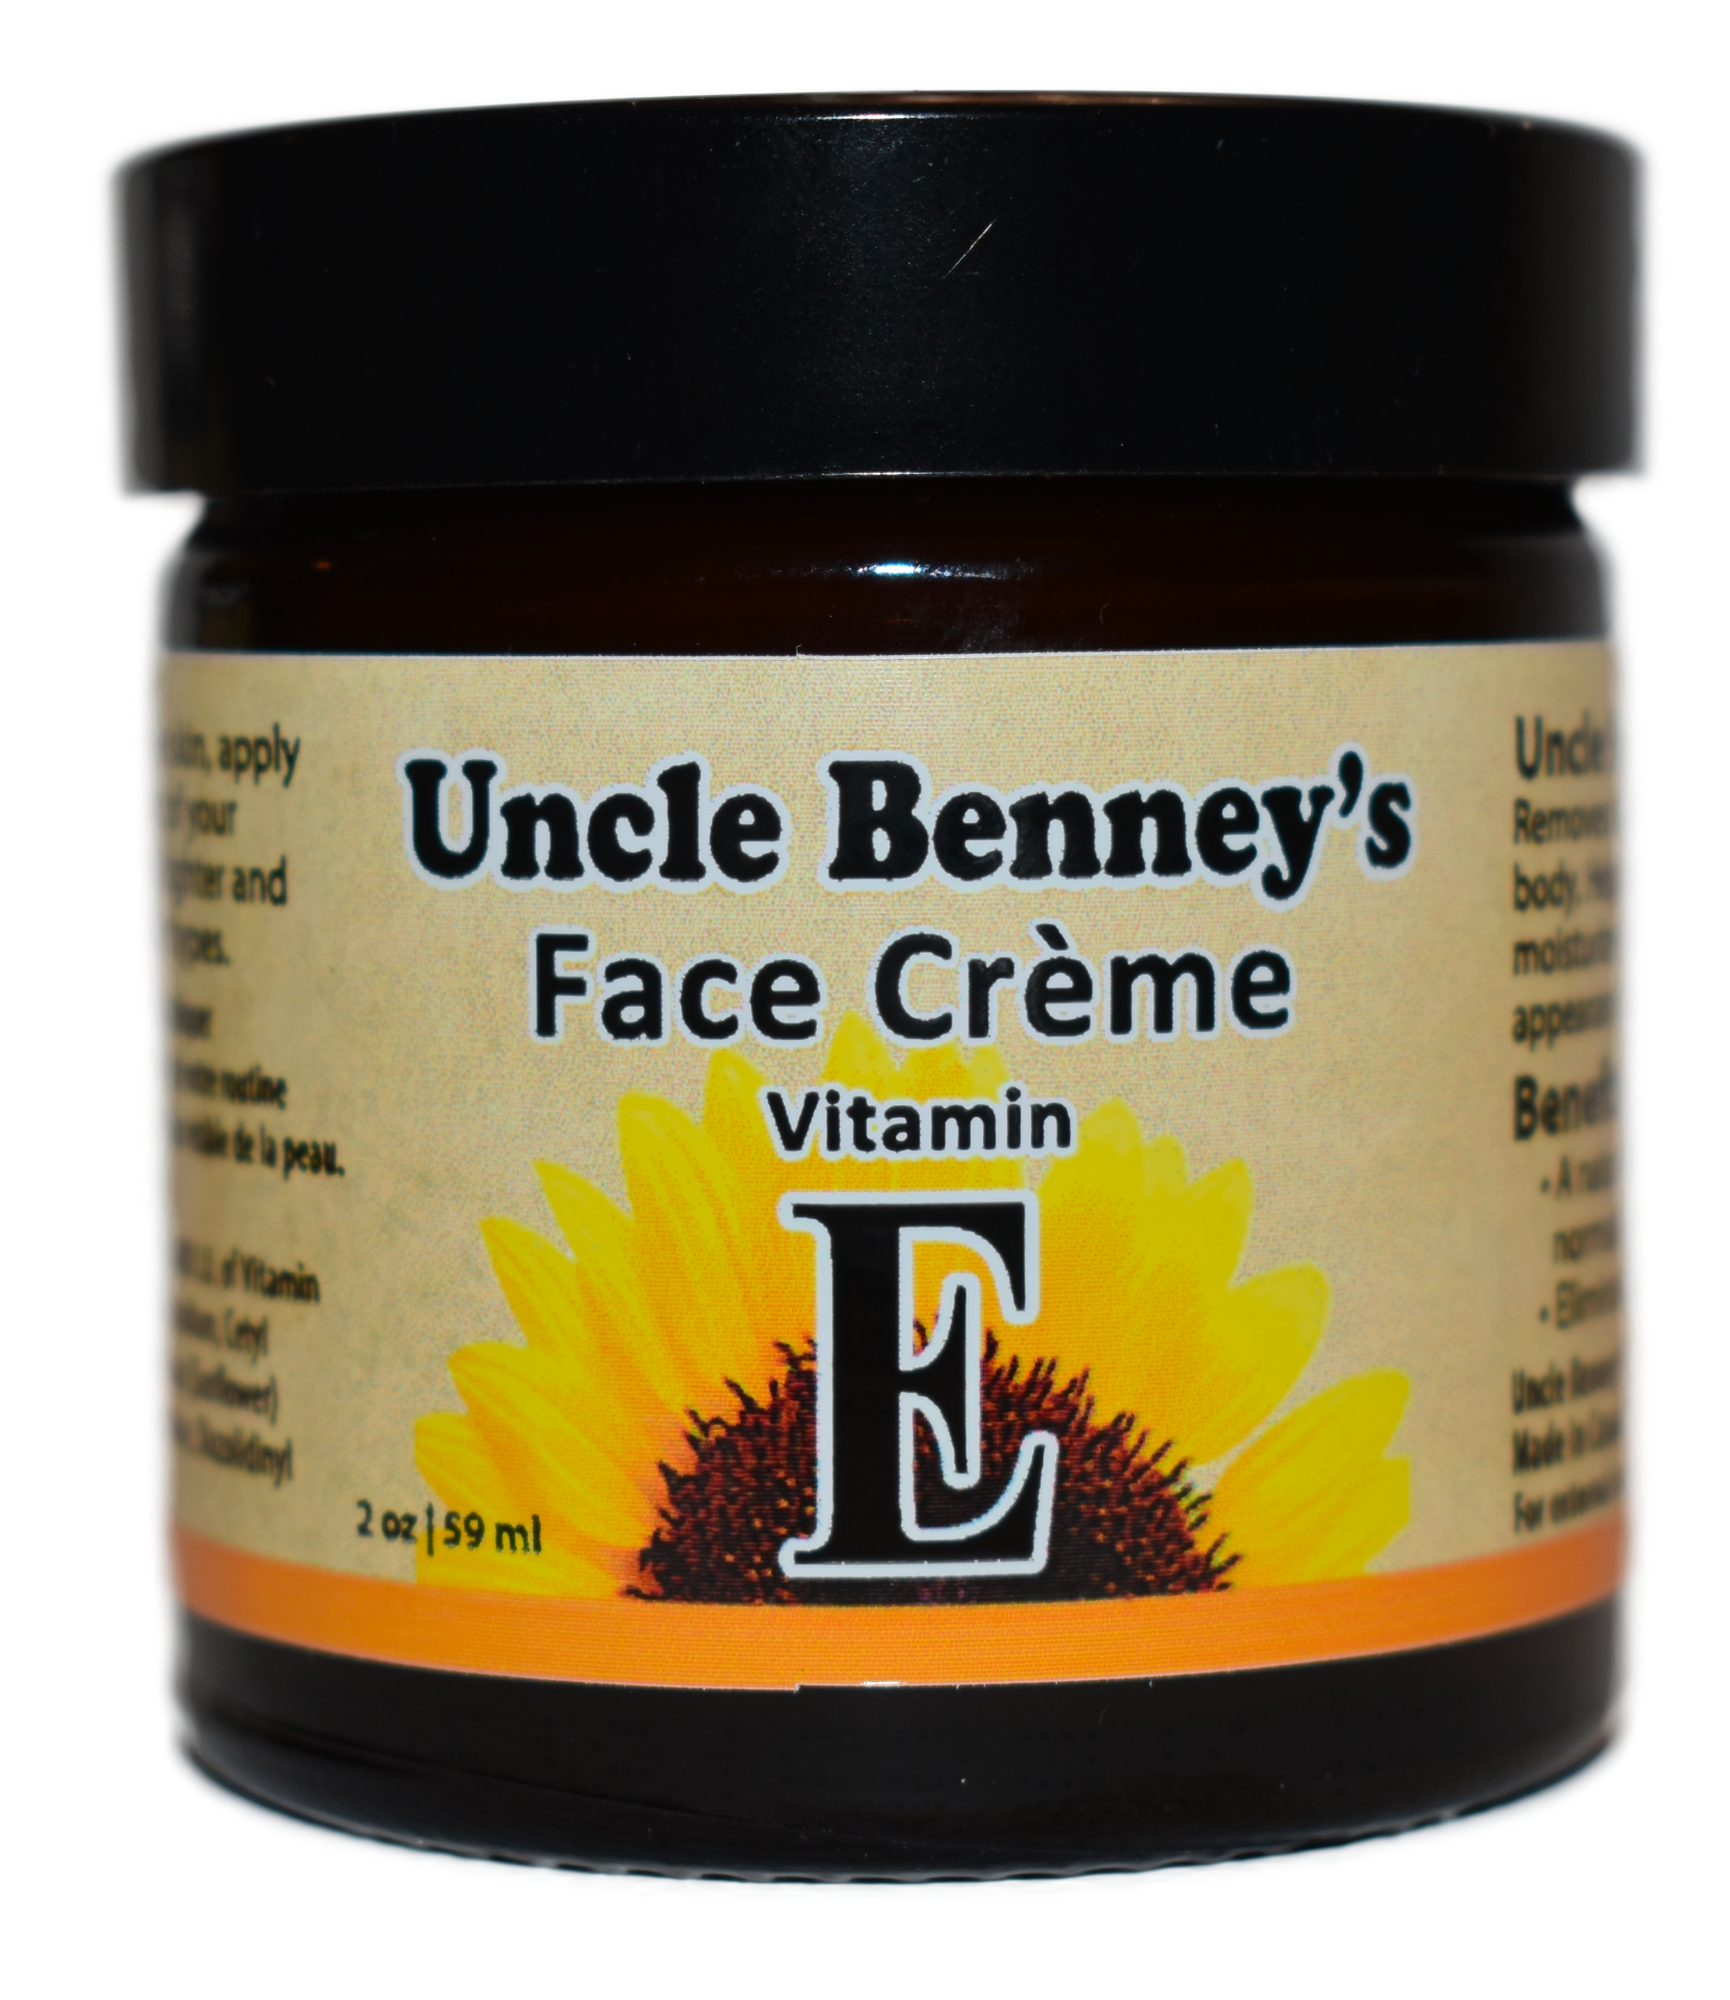 uncle benney's vitamin e moisturizer, uncle benney's vitamin e face cream, creme, how to nourish skin, how to reduce hyperpigmentation, vitamin e cream, vitamin e, turmeric butter, how to treat acne, turmeric soap, fading cream, whitening cream, vitamin c cream, hyperpigmentation, brightening cream, natural skincare products, pimples, skin hydration, skincare, skincare routine, skincare tips, turmeric, vitamin e face cream, turmeric face mask butter, vitamin e face mask